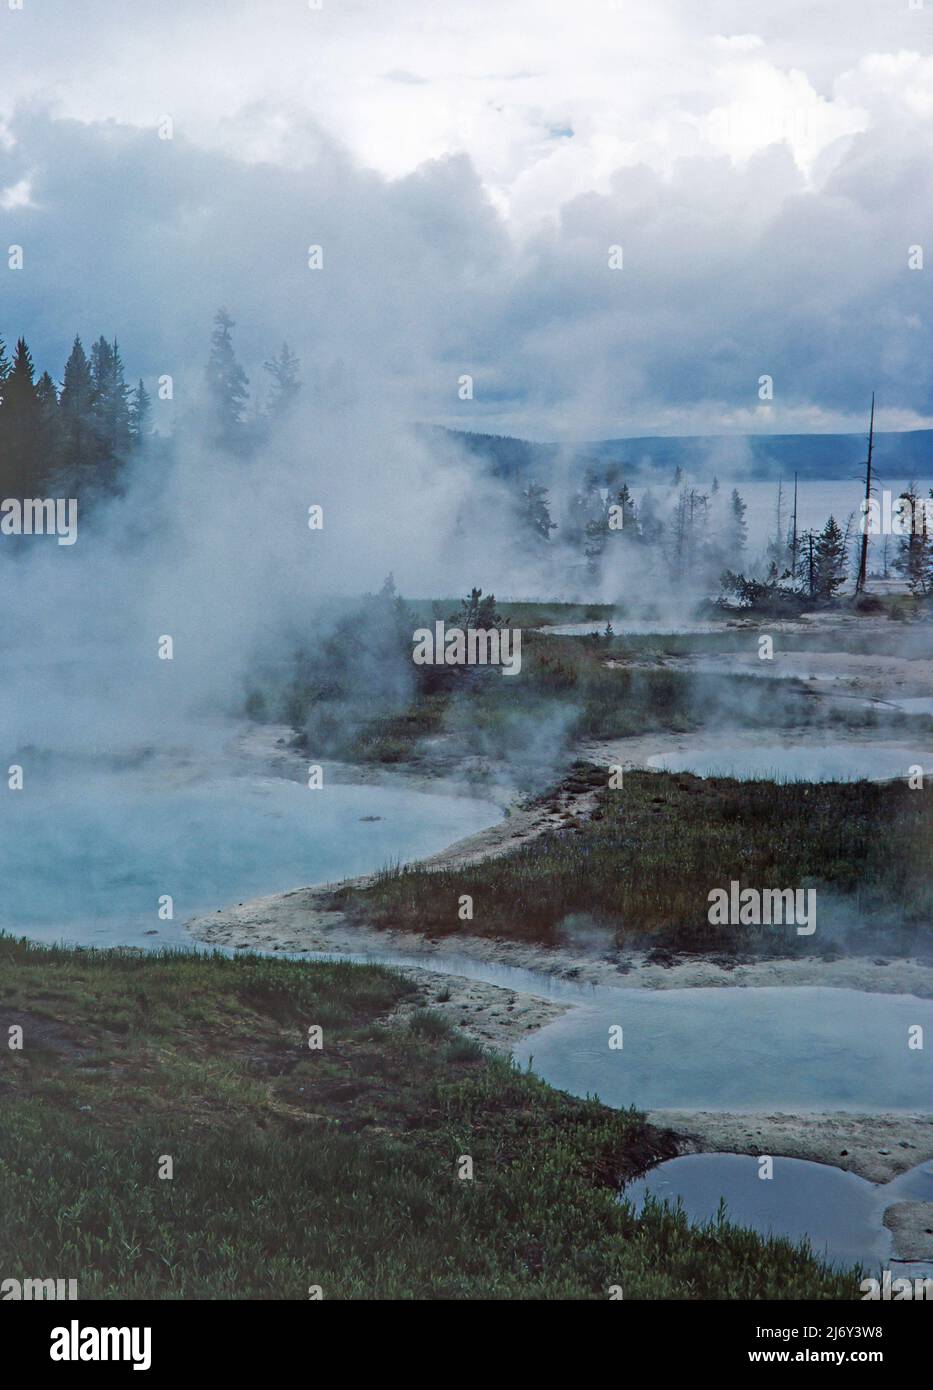 Steam rises from super heated thermal pools in Wyoming's Yellowstone National Park. Stock Photo